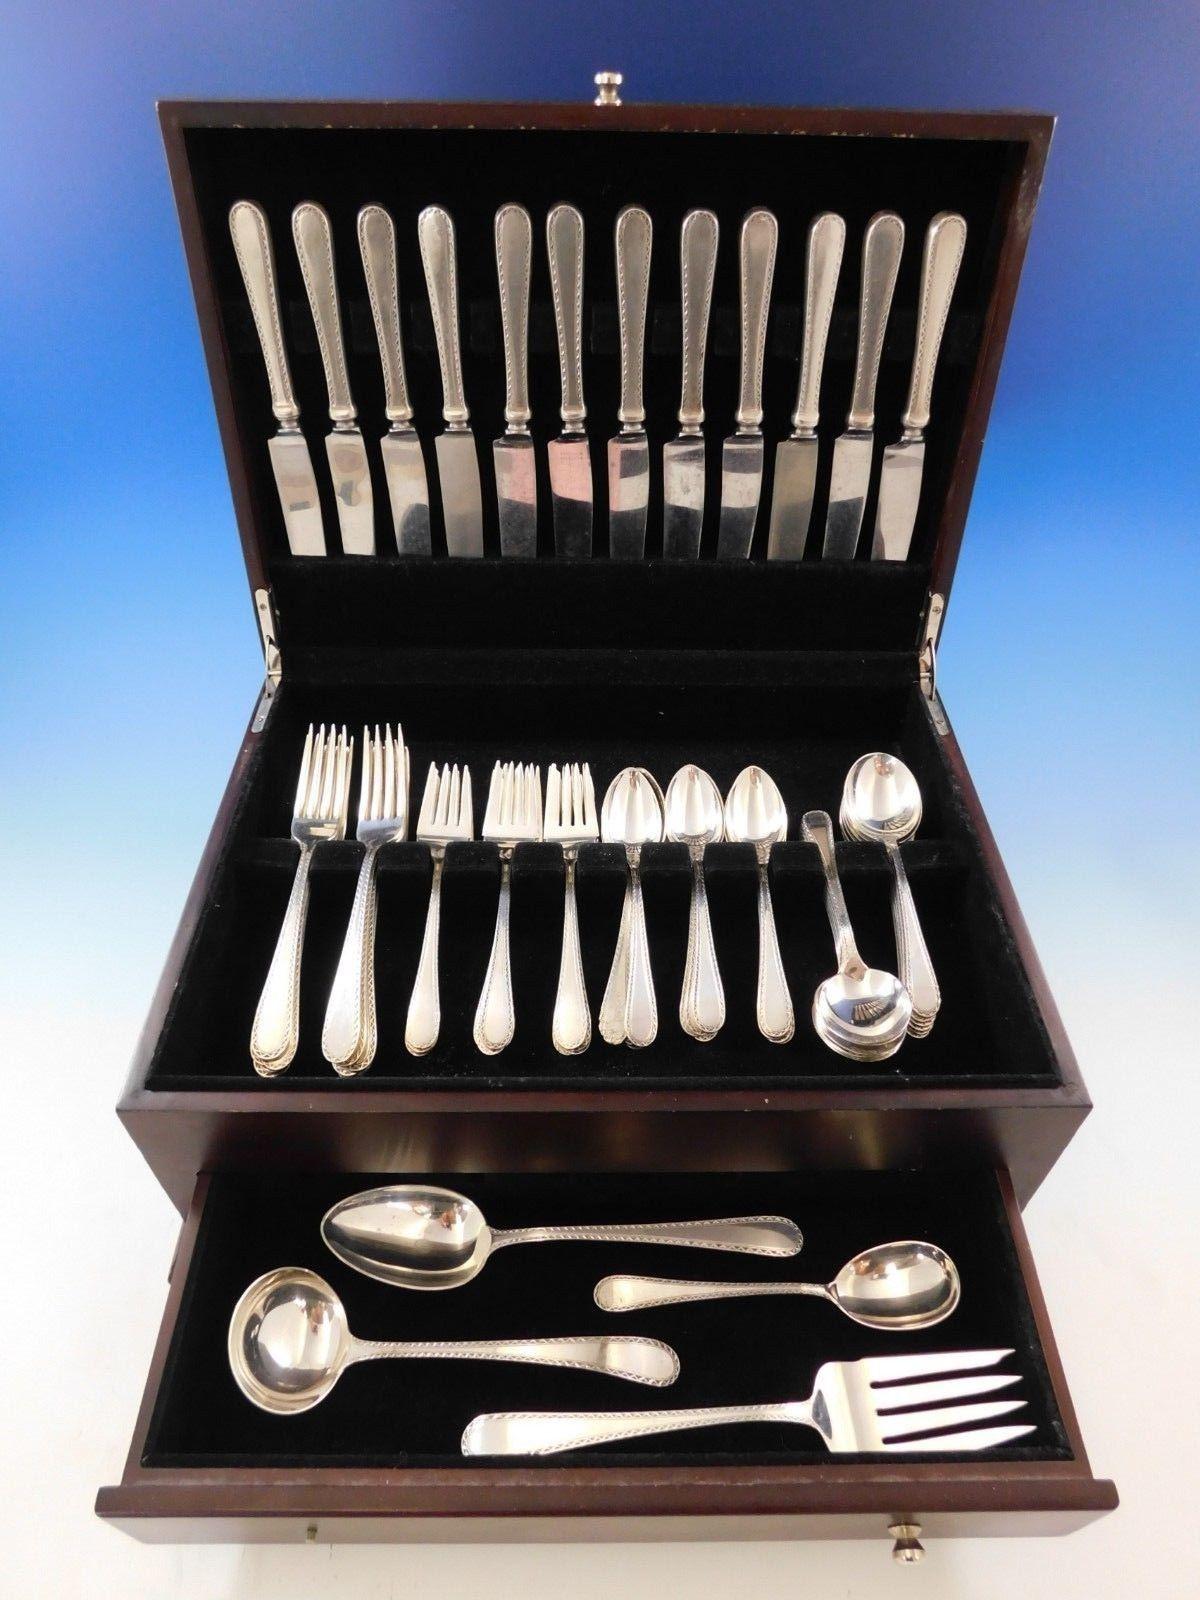 Lovely winslow by Kirk Sterling silver flatware set - 64 pieces. This set includes:

12 knives, 9